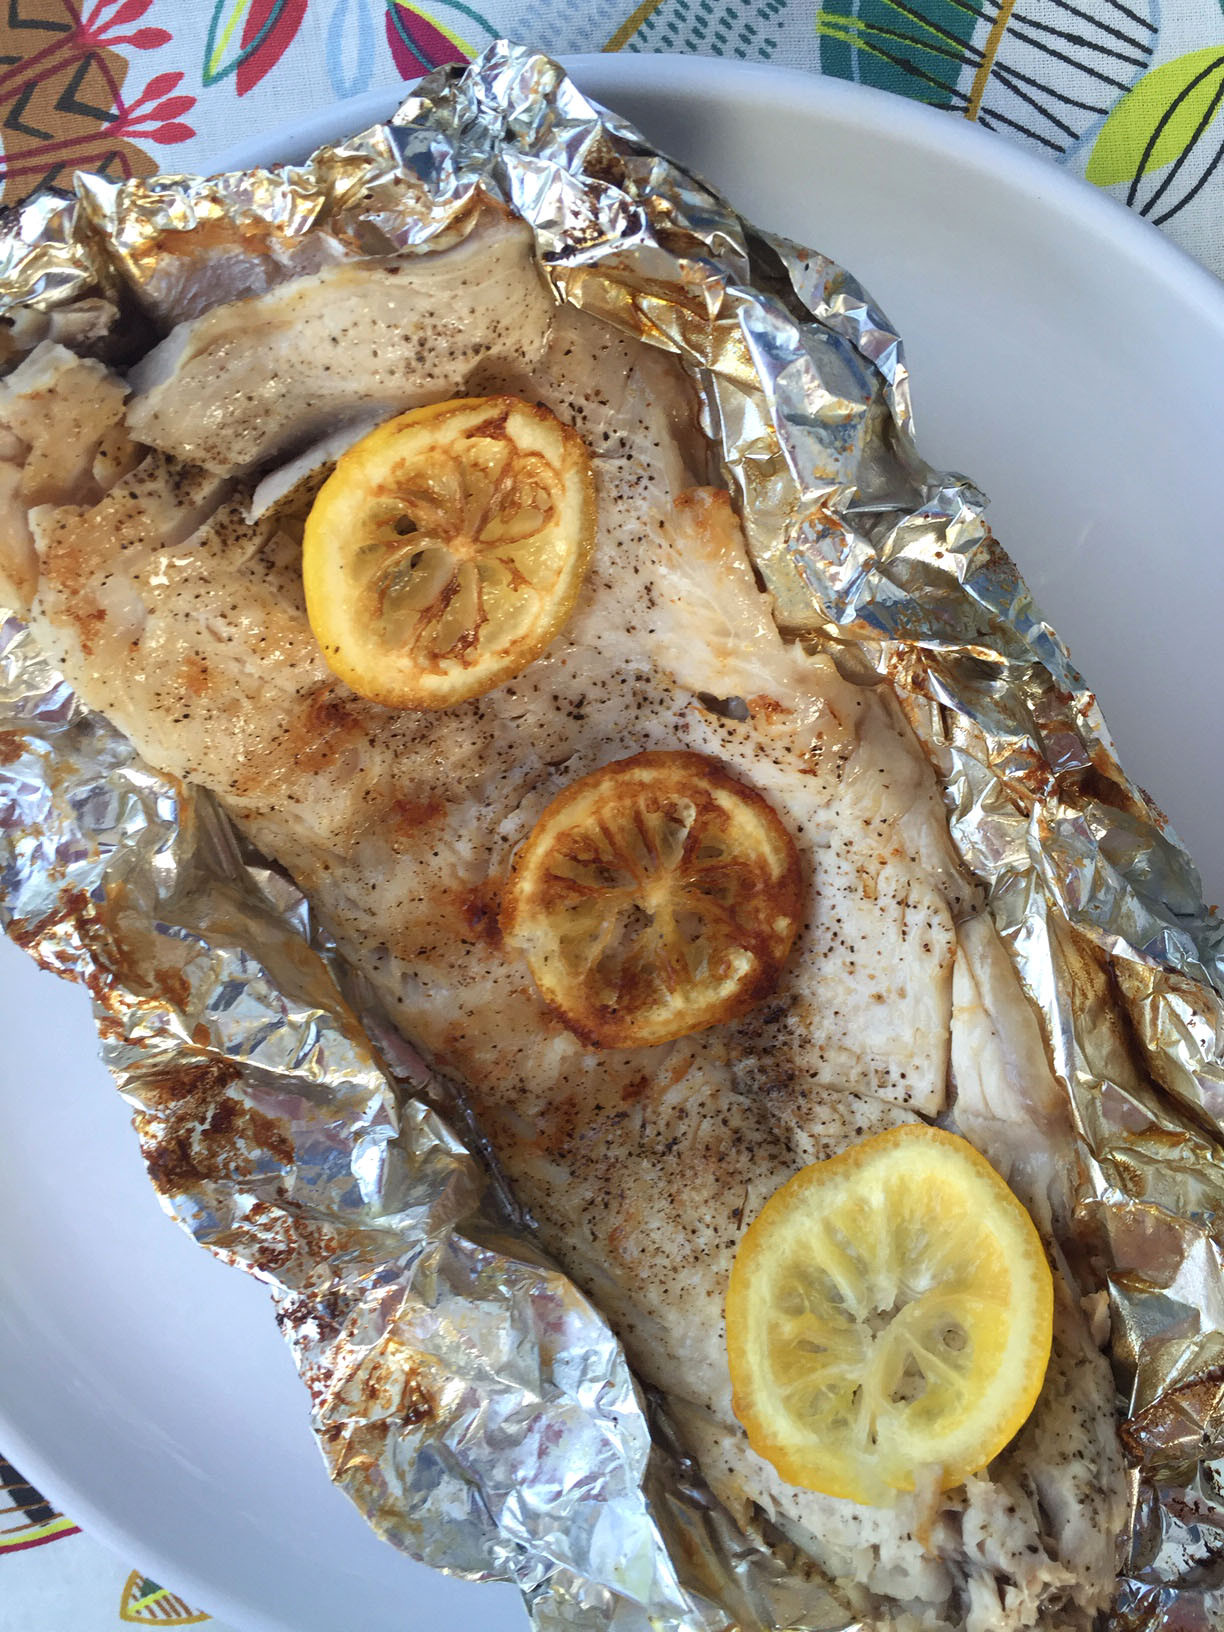 Fish In Foil Packets Recipes Elegant Fish In Foil Packets Recipe with Lemon butter – Grilled or